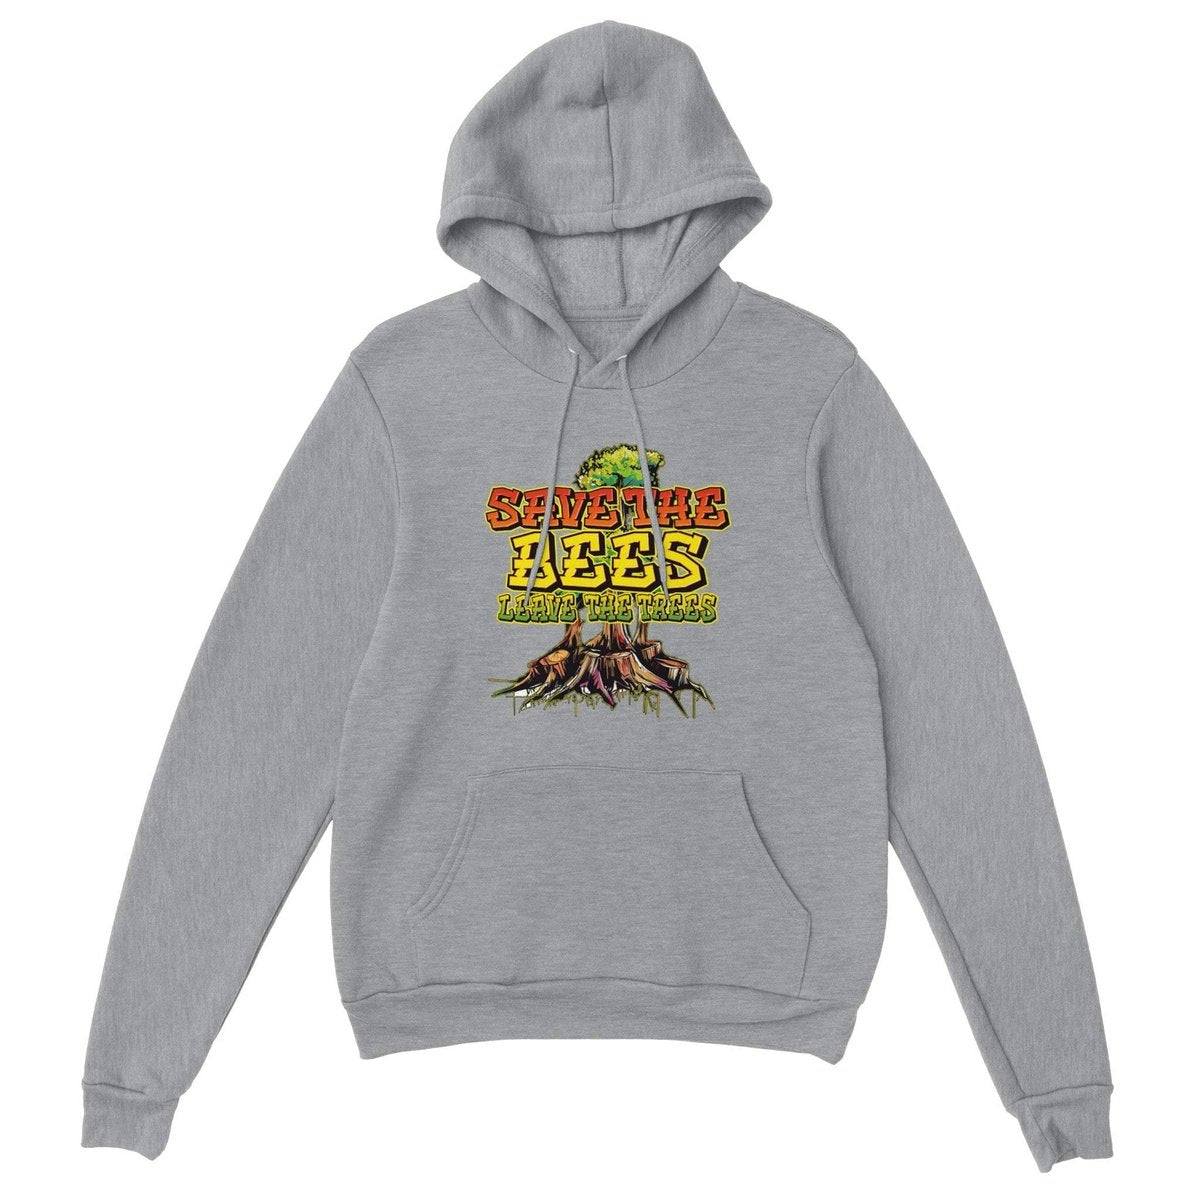 Save The Bees Hoodie - Leave The Trees - Stumps - Premium Unisex Pullover Hoodie Australia Online Color Sports Grey / XS